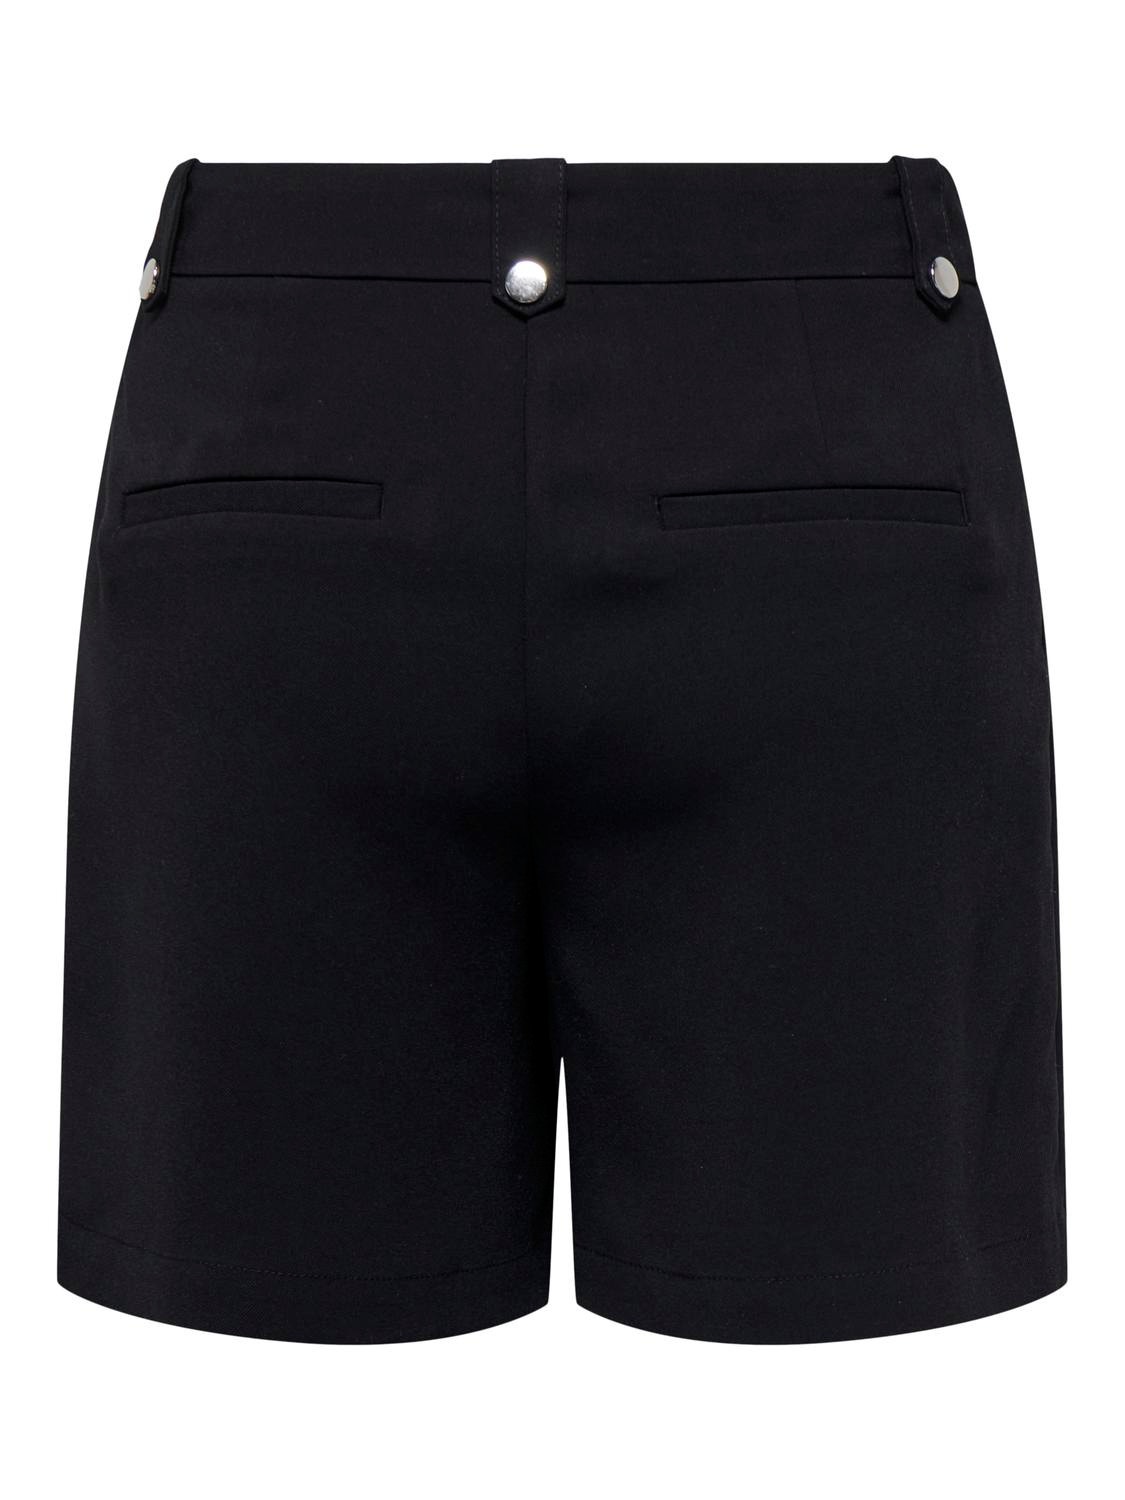 ONLY Shorts with high waist -Black - 15310953